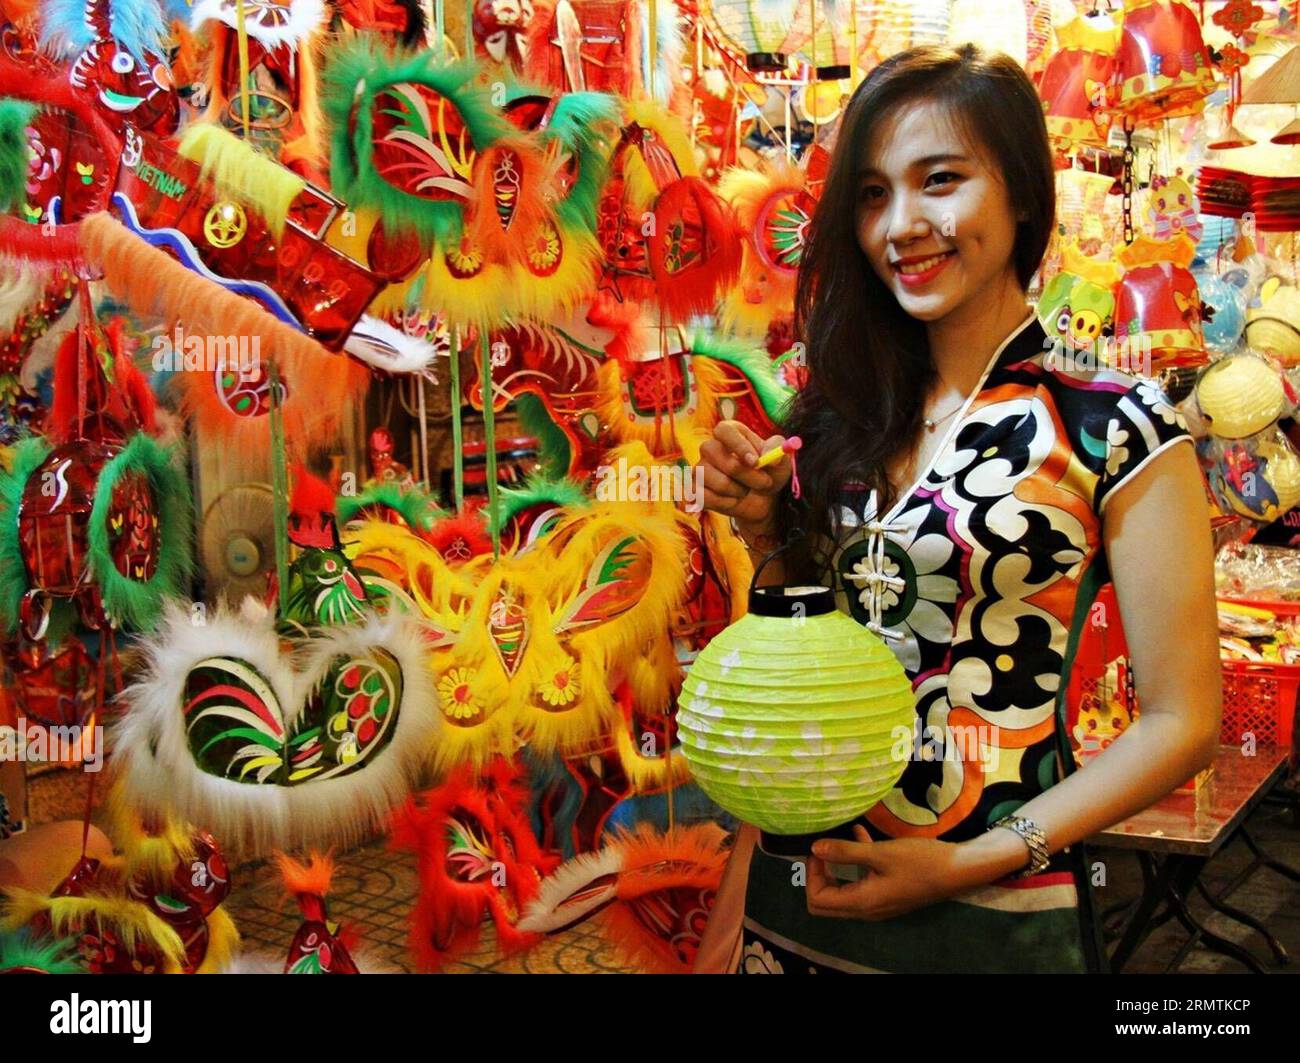 A girl poses for pictures during a visit to the Lantern Street in Ho Chi Minh City, on Sept. 8, 2014. The Mid-Autumn festival is one of the biggest celebrations of the year in Vietnam. Tao Jun) VIETNAM-HO CHI MINH CITY-MID-AUTUMN FESTIVAL-LANTERN NguyenxLexHuyen PUBLICATIONxNOTxINxCHN   a Girl Poses for Pictures during a Visit to The Lantern Street in Ho Chi Minh City ON Sept 8 2014 The Mid Autumn Festival IS One of The Biggest celebrations of The Year in Vietnam Tao jun Vietnam Ho Chi Minh City Mid Autumn Festival Lantern  PUBLICATIONxNOTxINxCHN Stock Photo